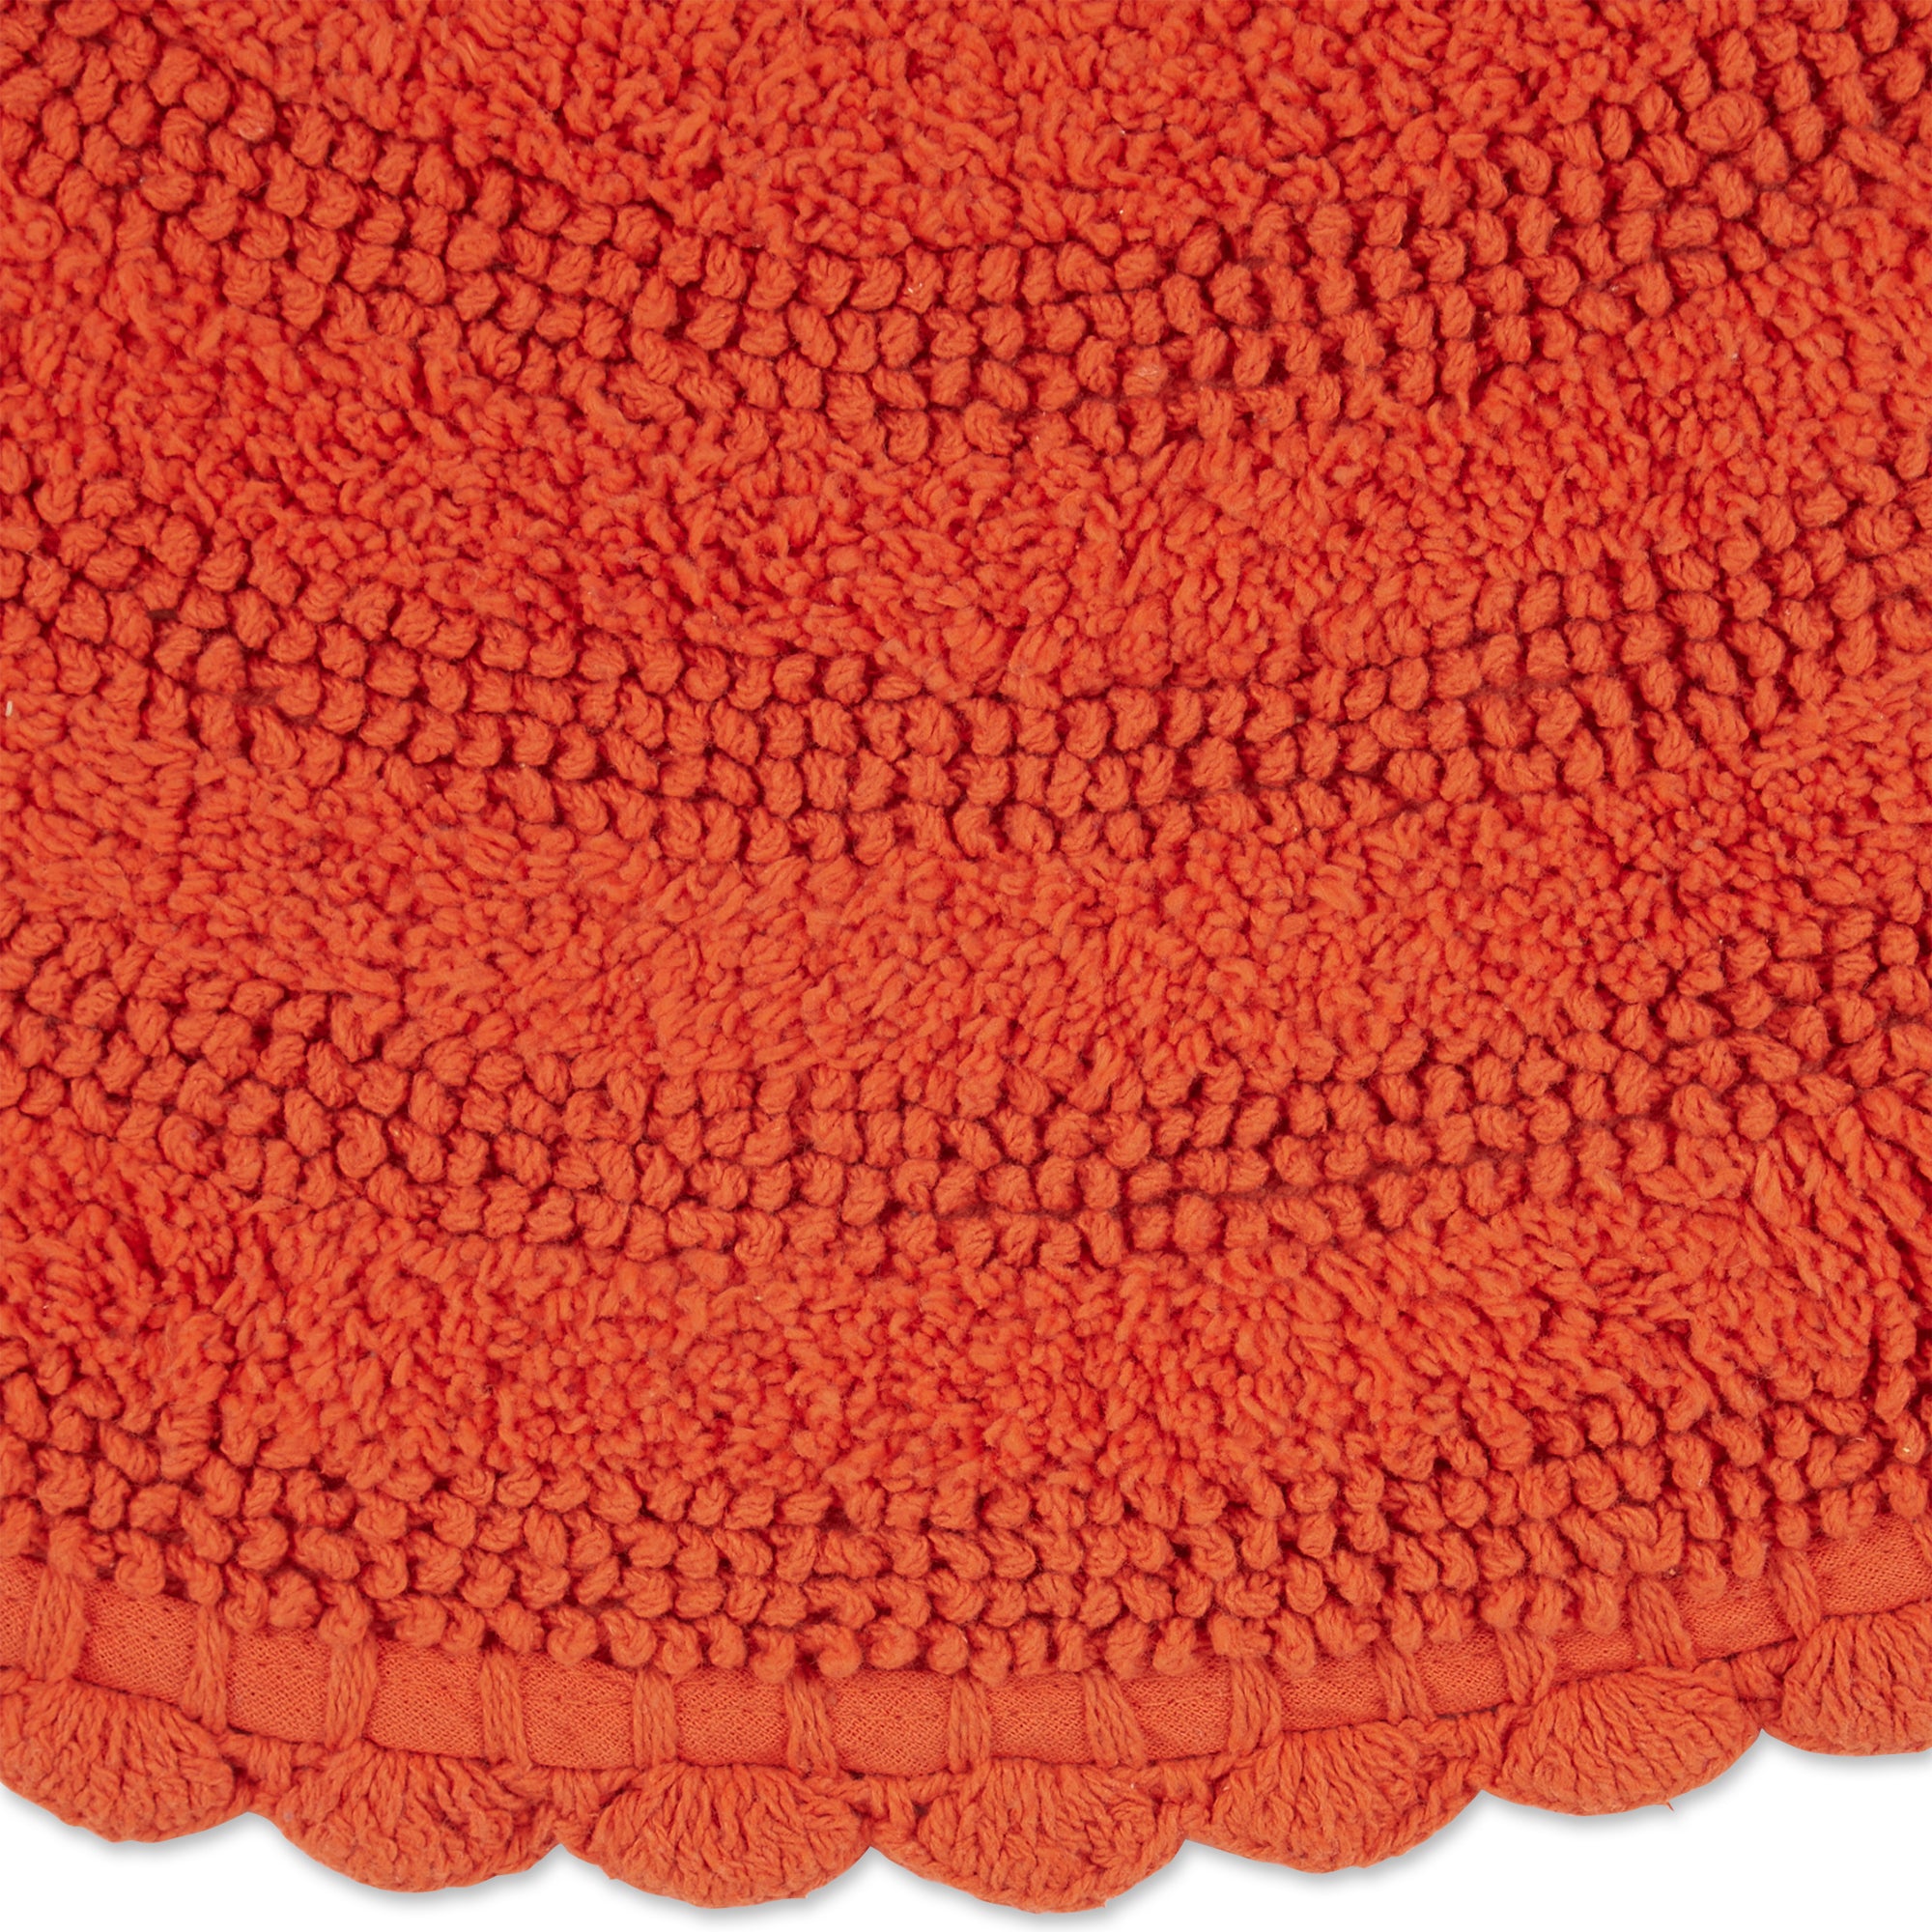 DII Off White Large Oval Crochet Bath Mat – DII Home Store